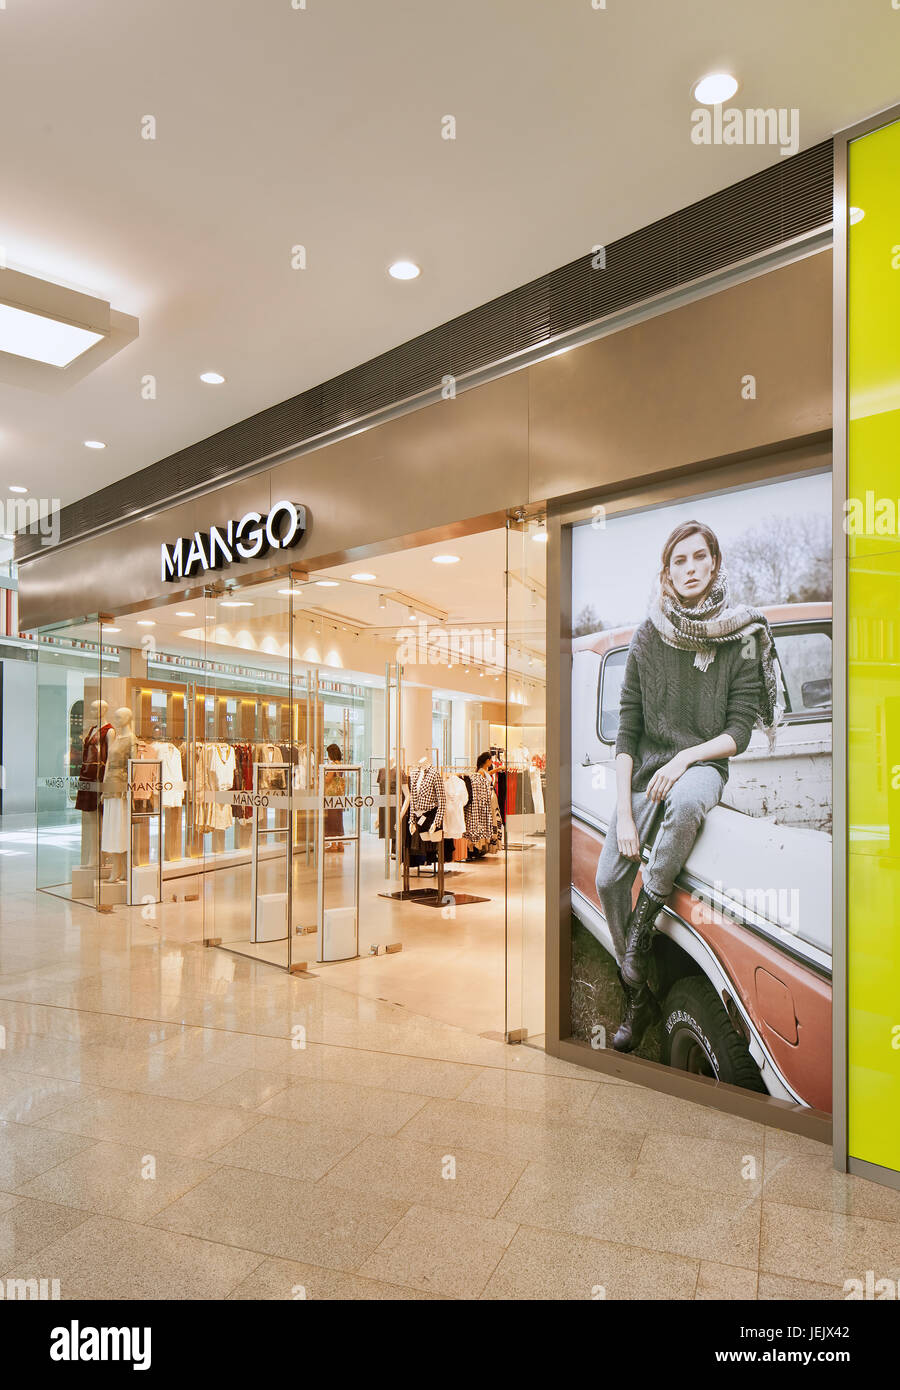 mango outlet high resolution stock photography and images alamy